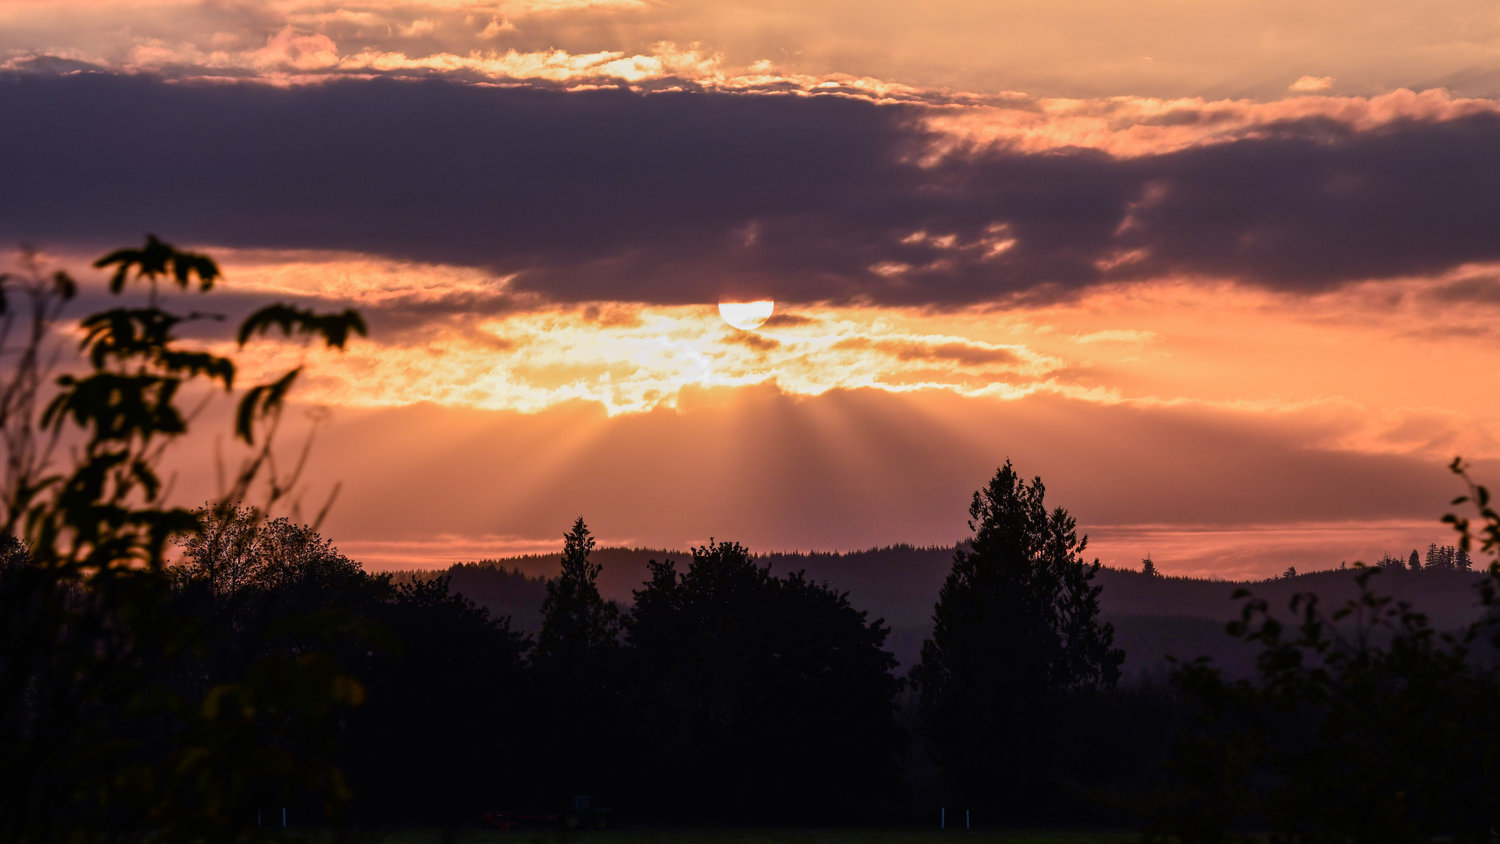 Rays of light shine through clouds over the Willapa Hills as the sun sets.